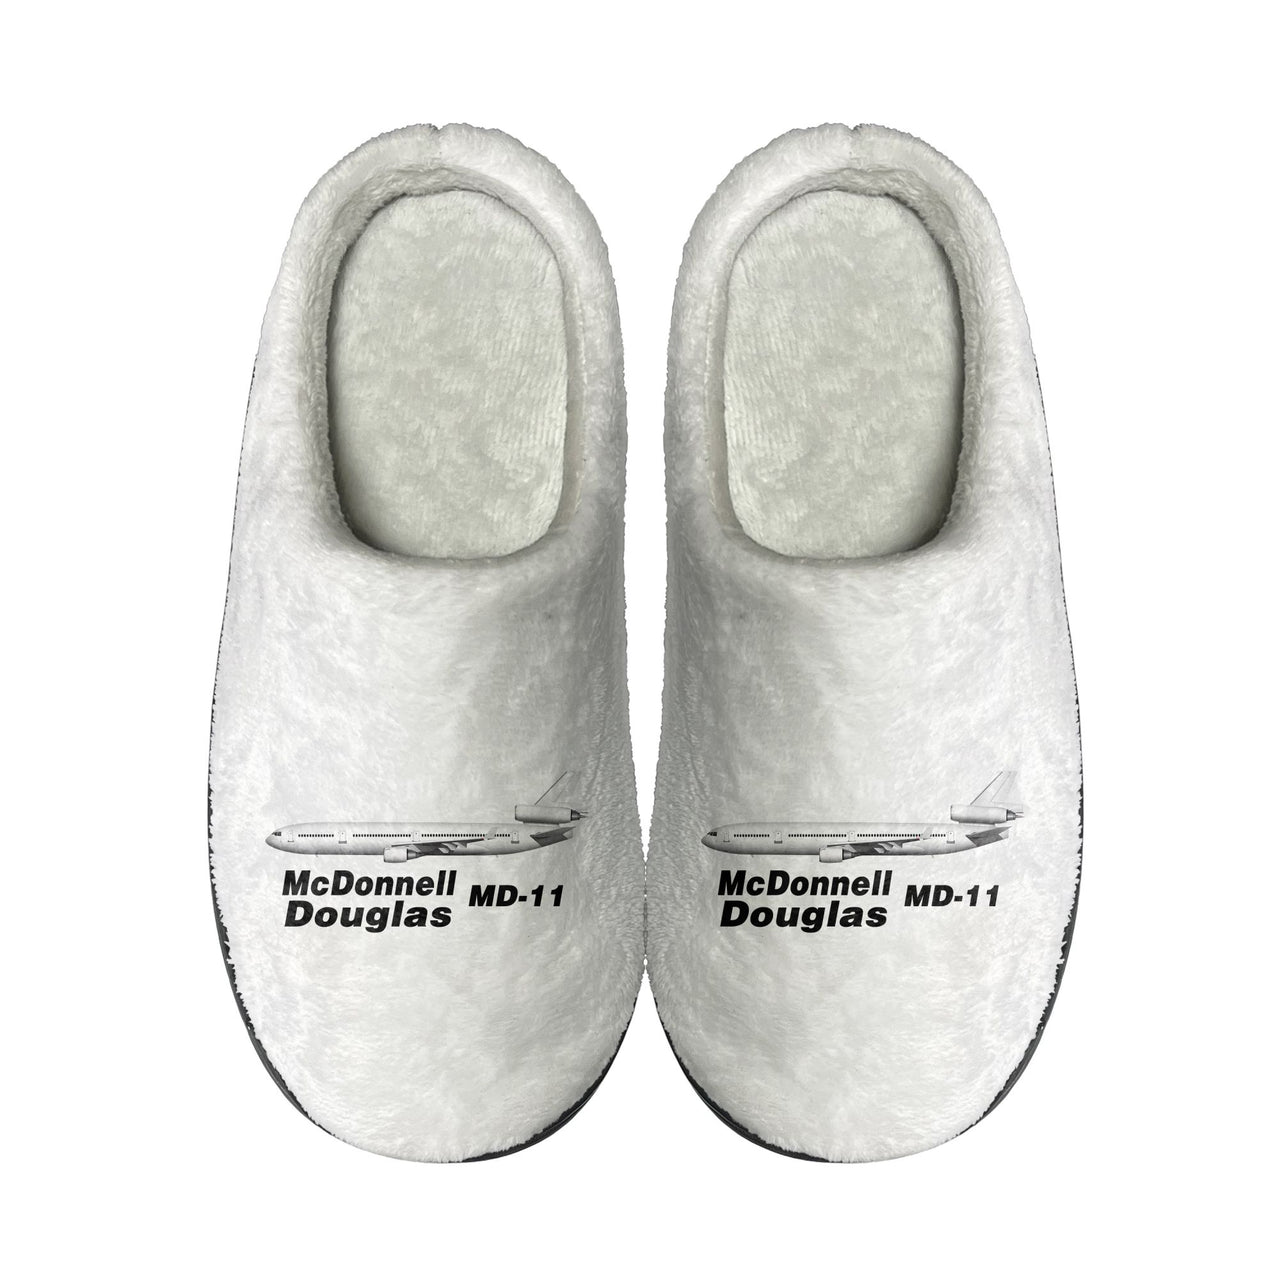 The McDonnell Douglas MD-11 Designed Cotton Slippers